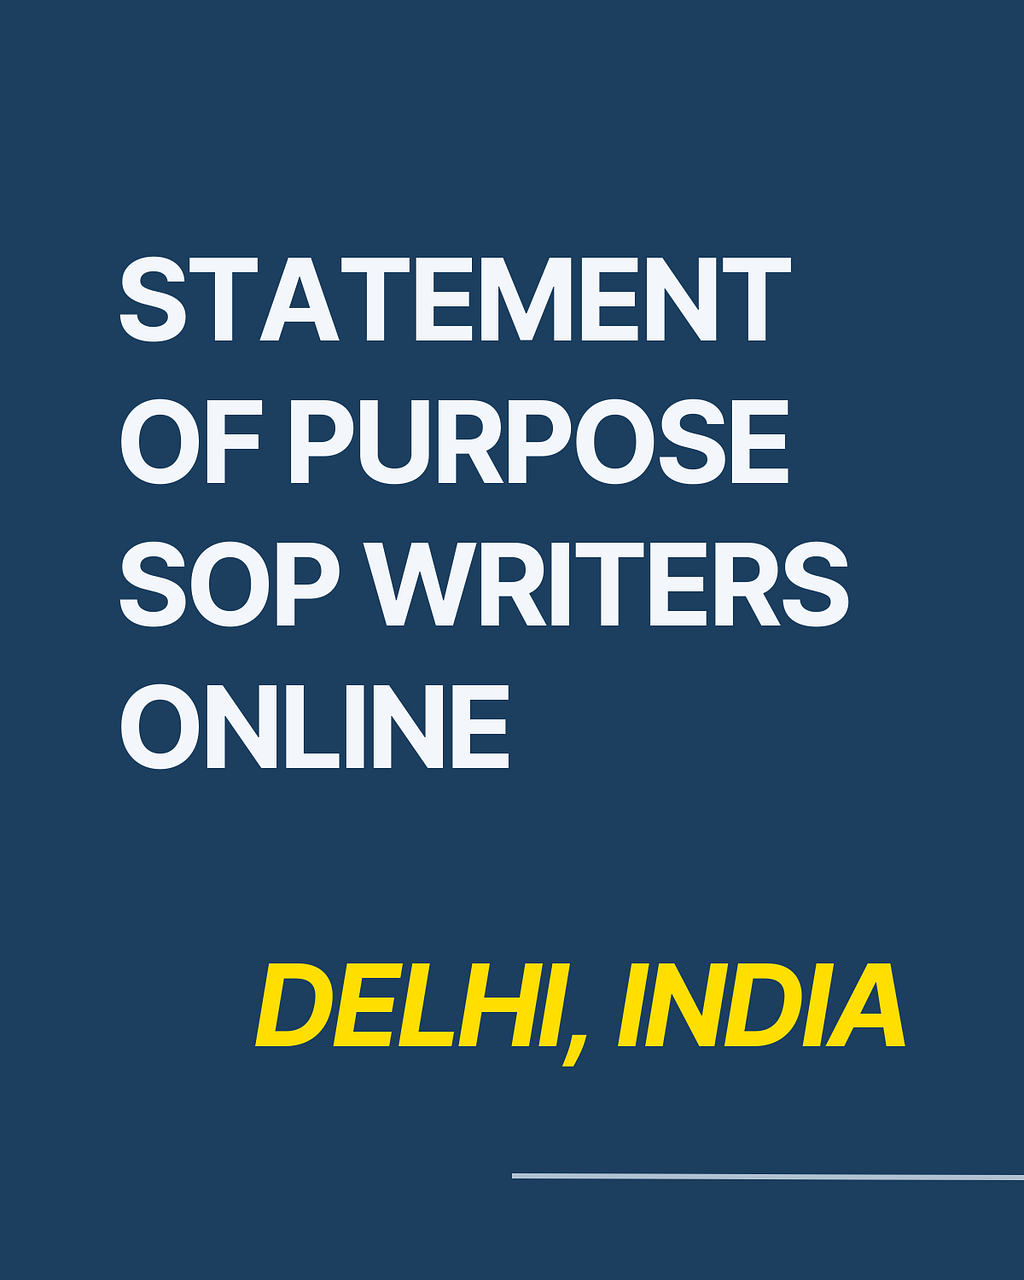 Statement of Purpose Writers Online for hire in India — Get the list of 5 best sop writing services in India located in New Delhi